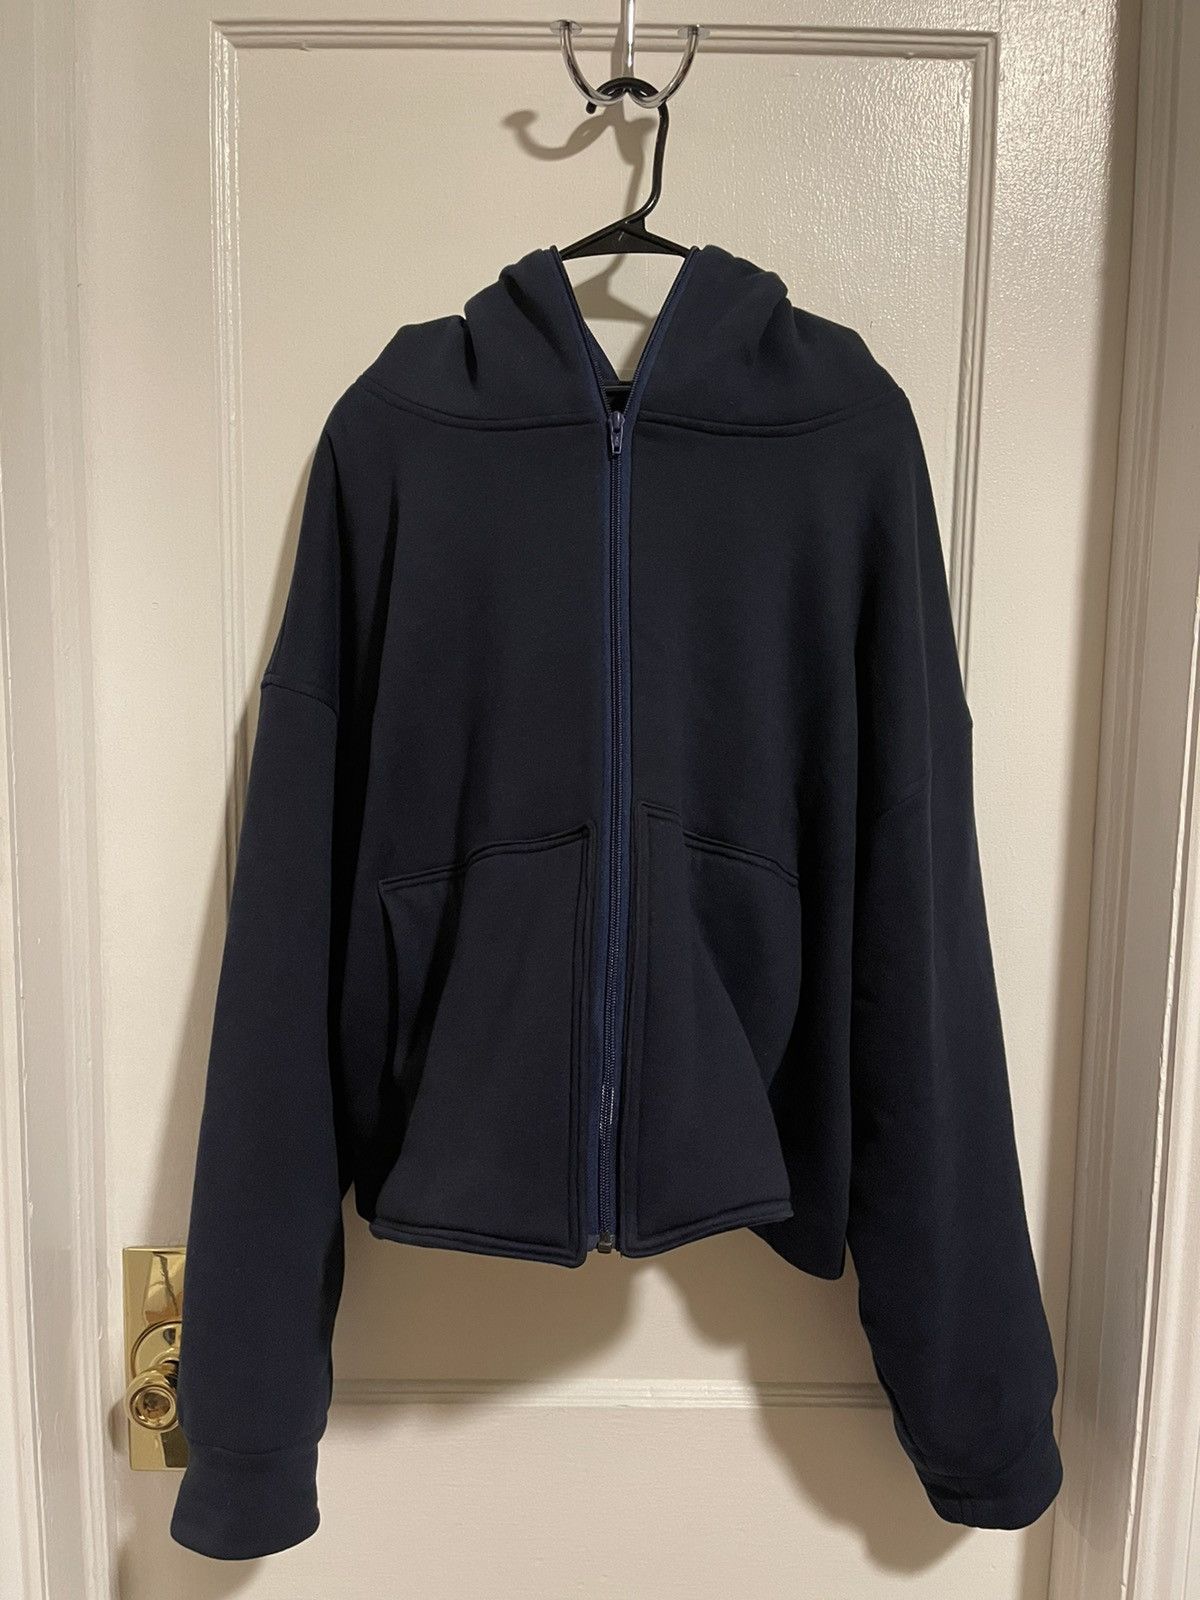 Antony Riddle Antony RiDDLE Navy Executioner Hoodie | Grailed